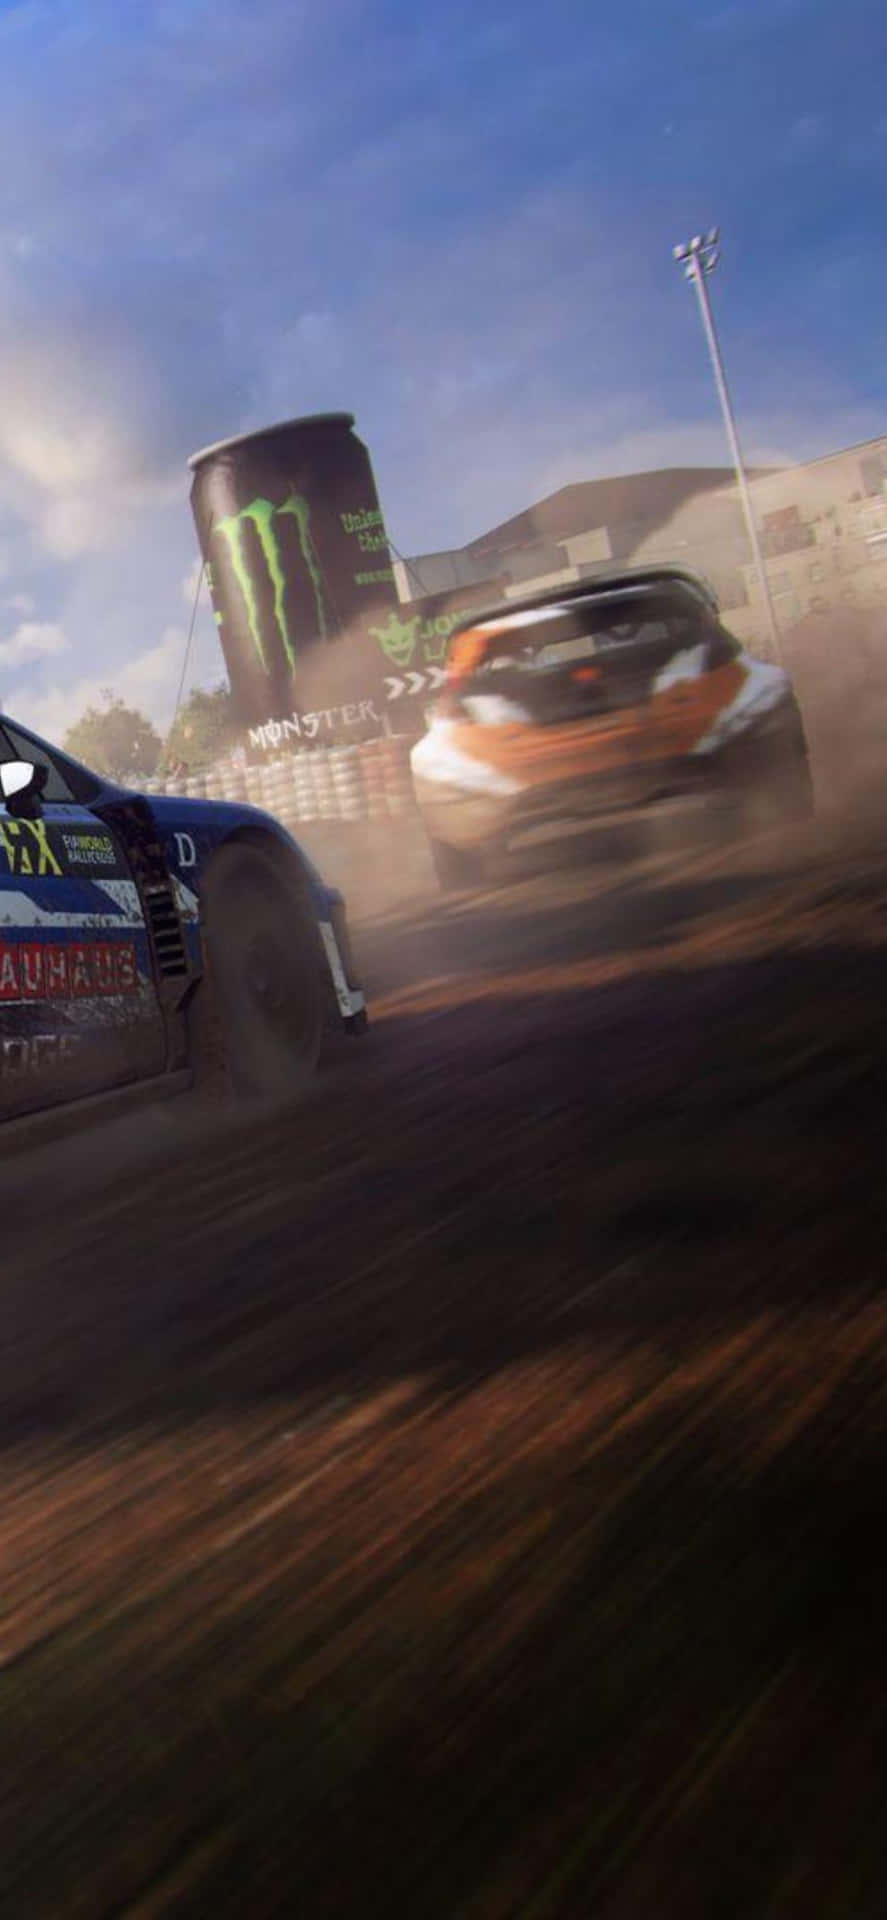 Take on the race with the Iphone Xs and Dirt Rally